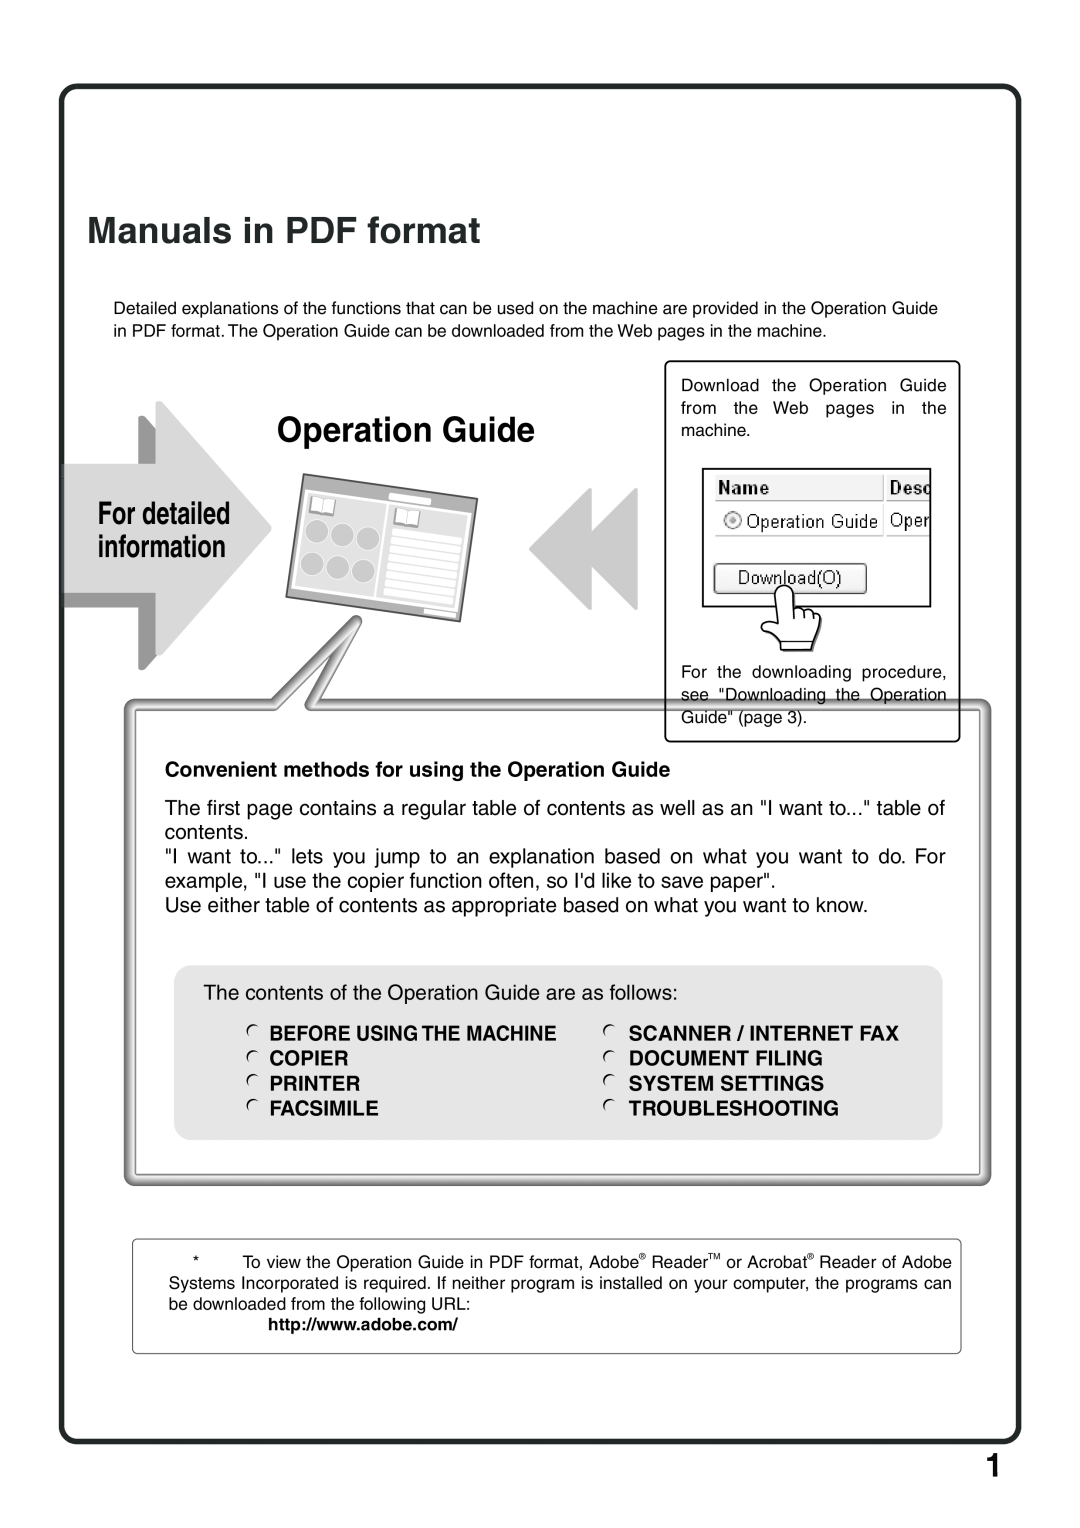 Sharp MX-5001N Manuals in PDF format, For detailed information, Operation Guide, Before Using The Machine, Copier, Printer 